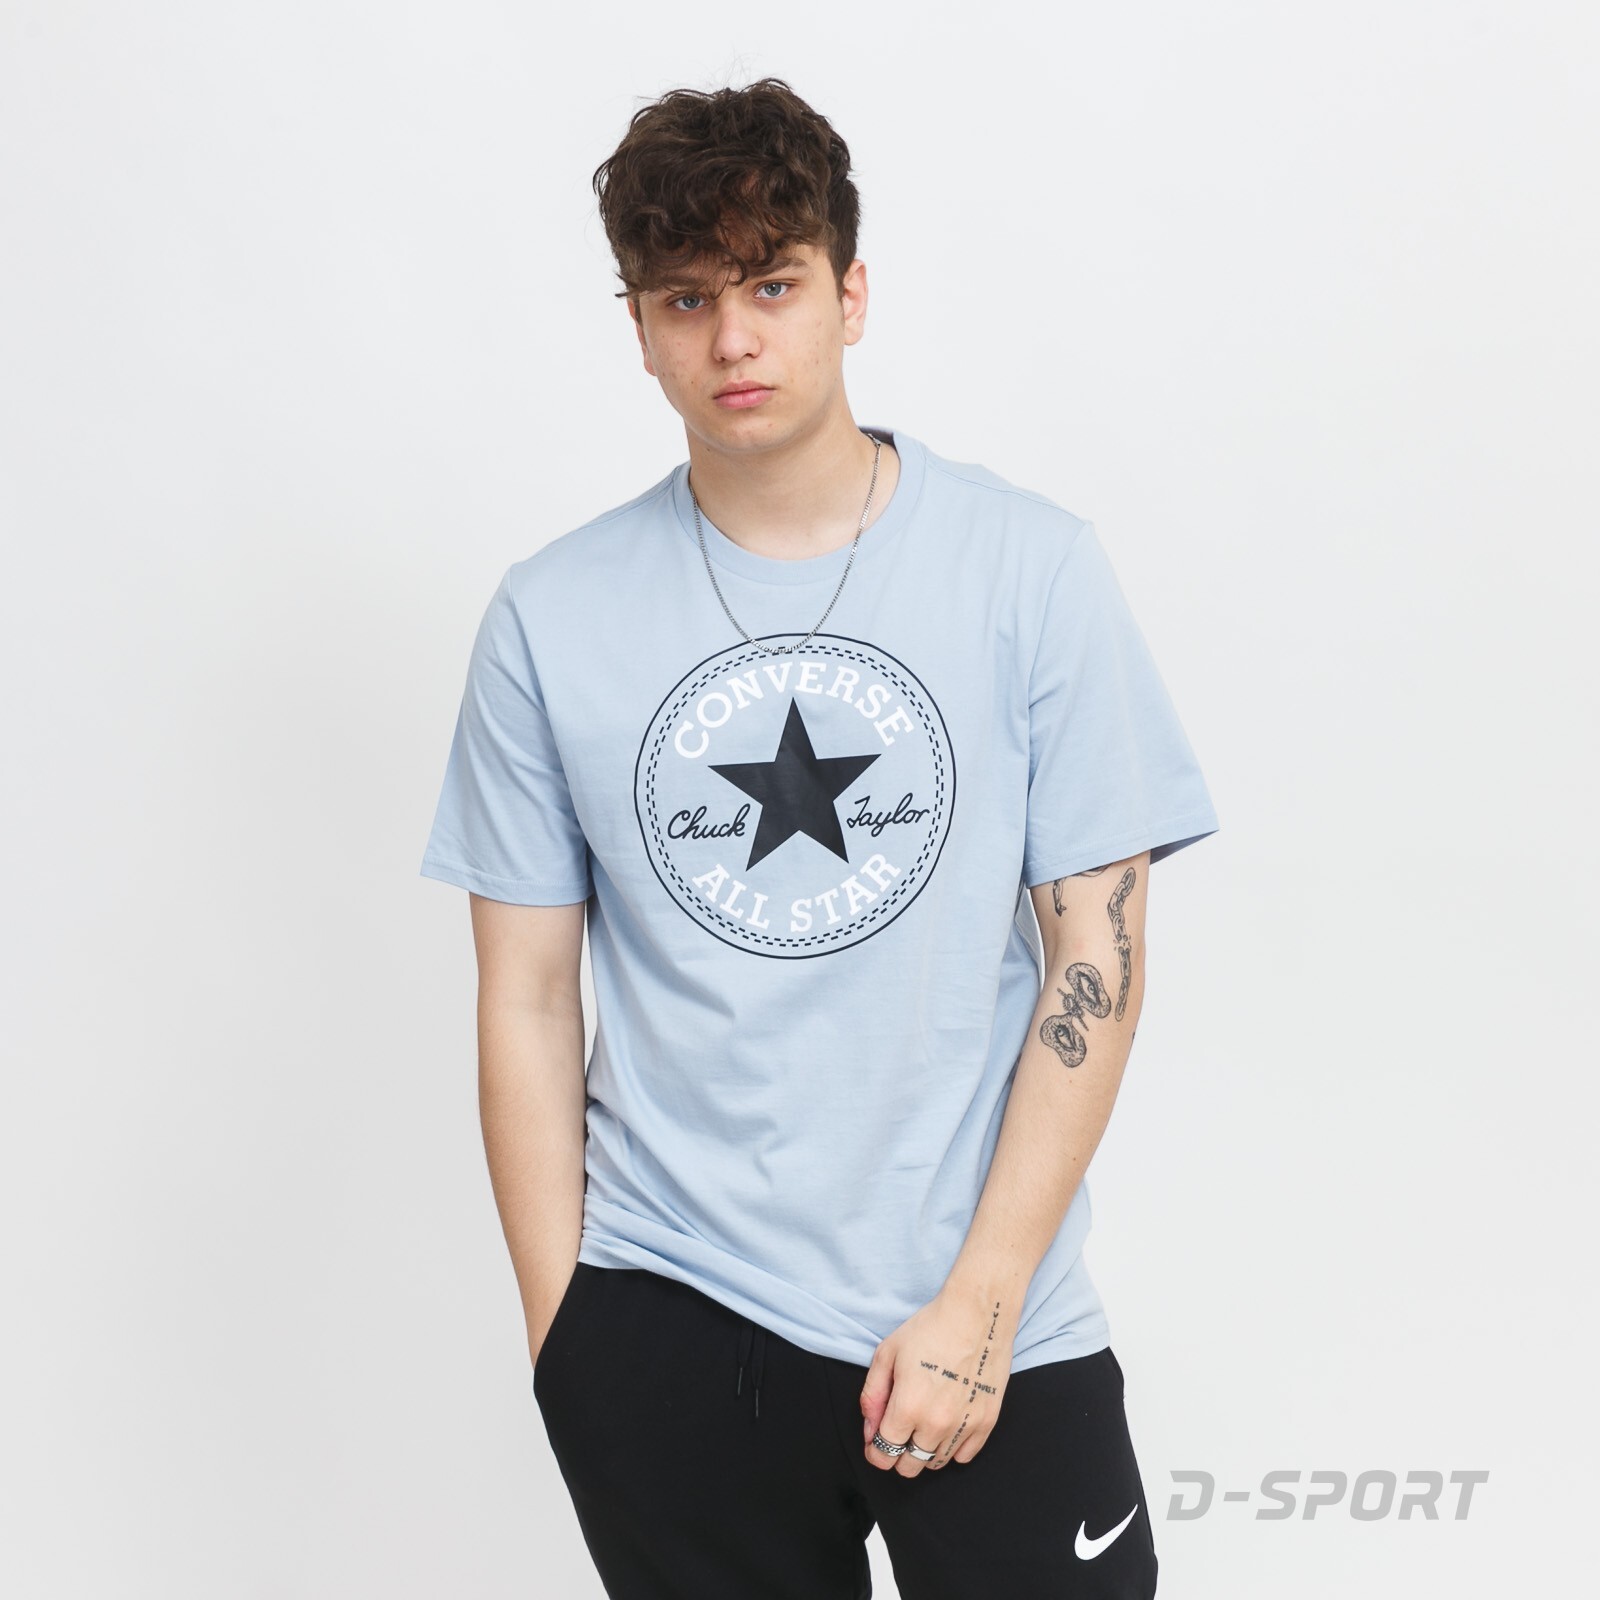 CHUCK TAYLOR PATCH GRAPHIC TEE